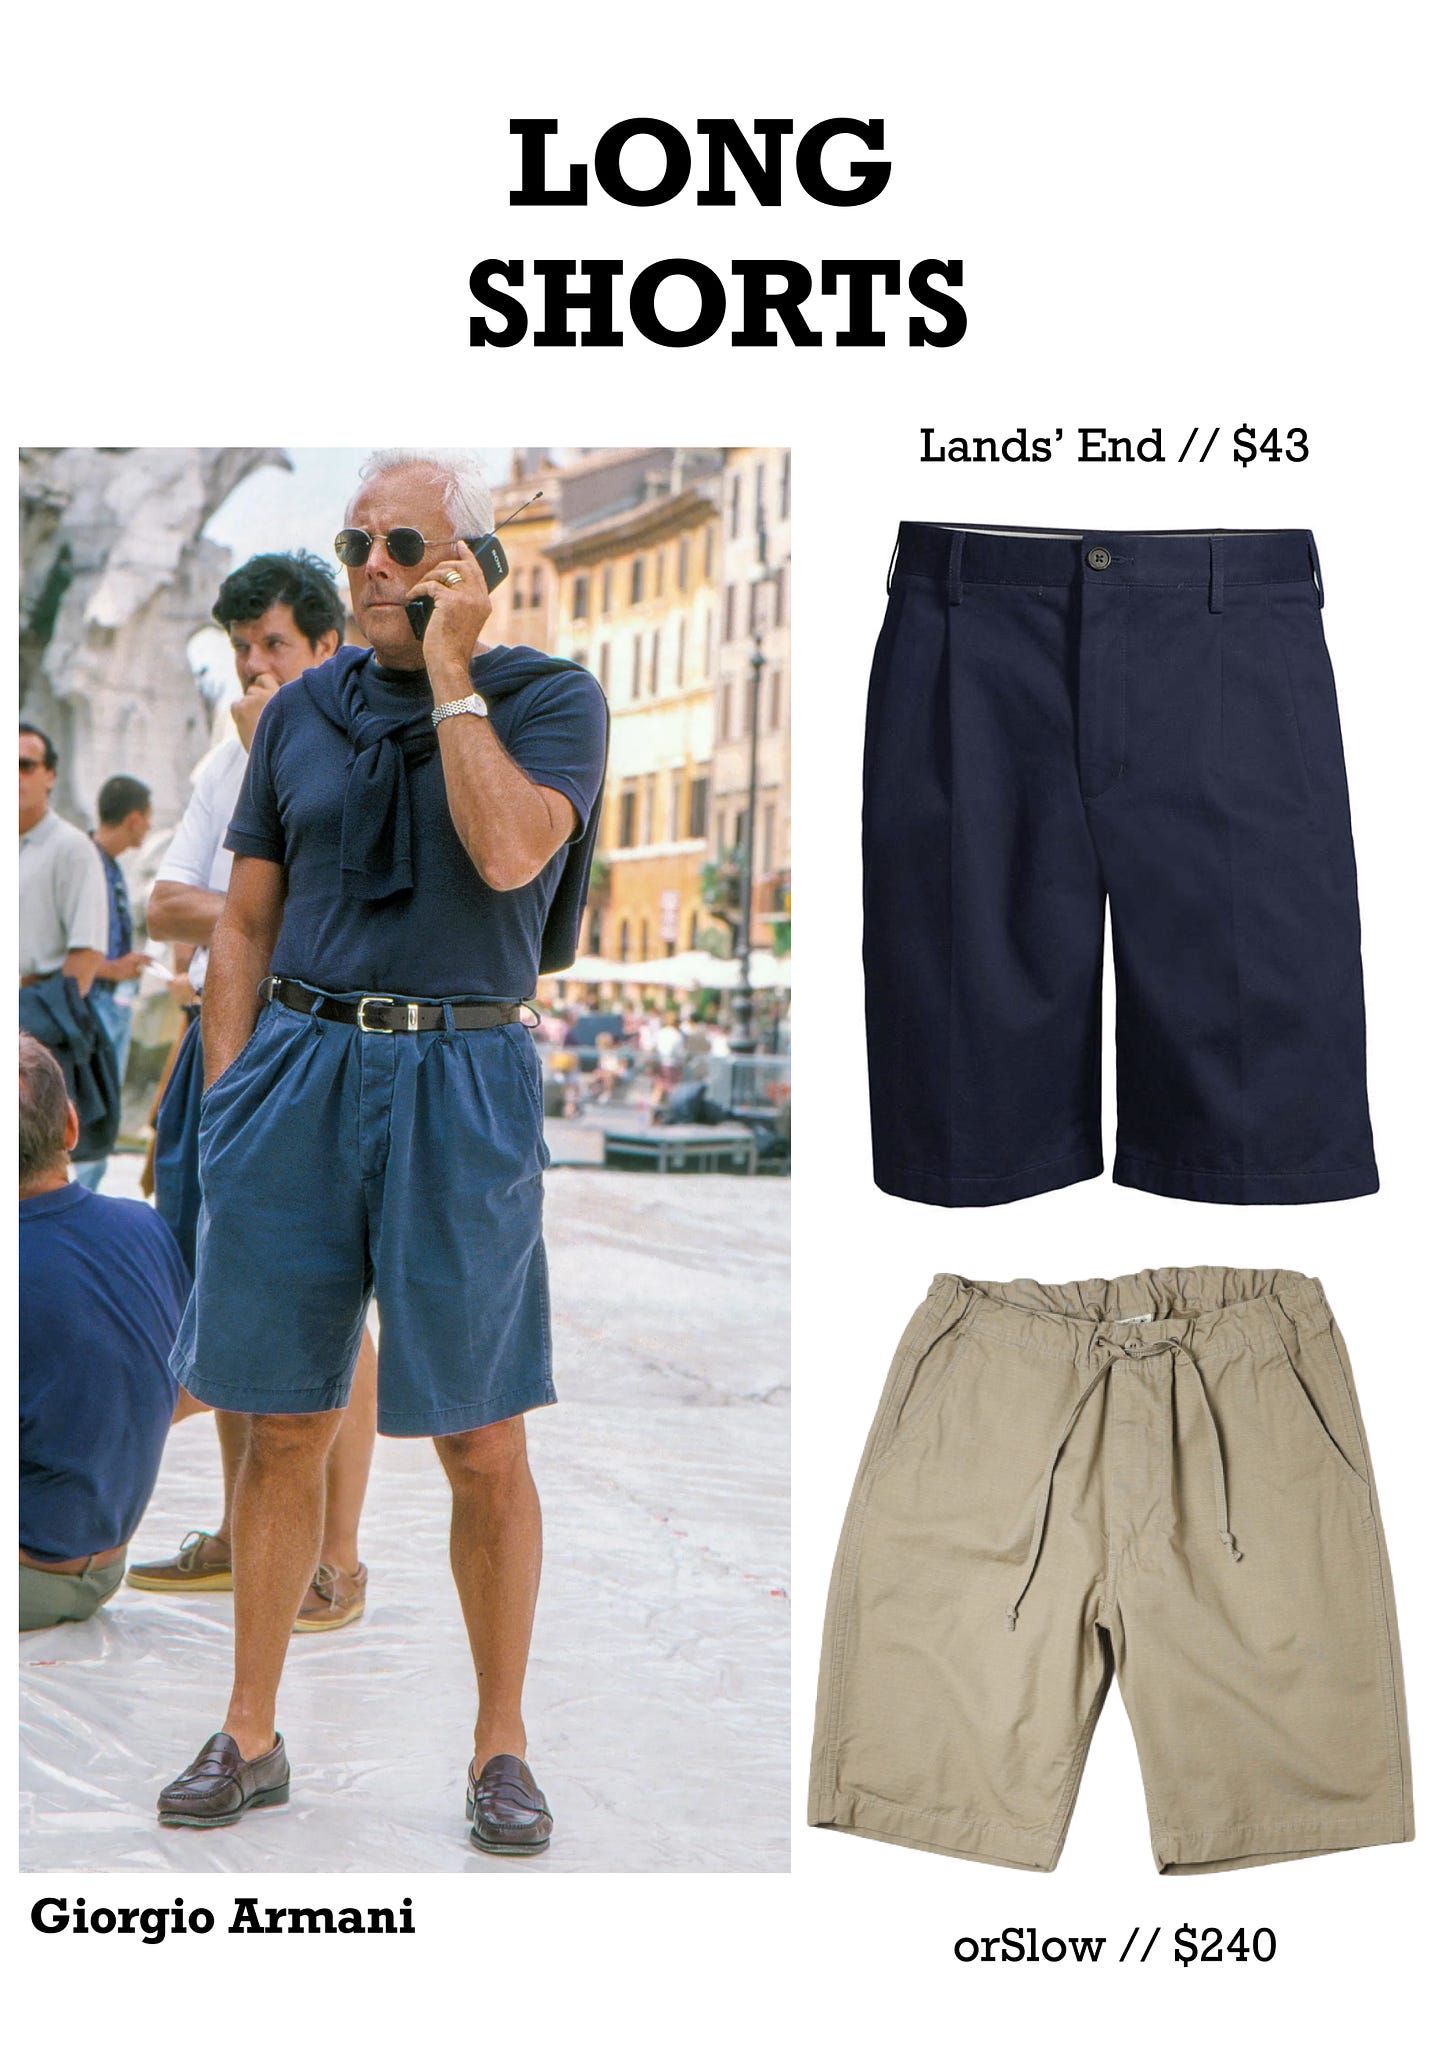 https://www.landsend.com/products/mens-traditional-fit-pleated-9-no-iron-chino-shorts/id_222776?cm_re=add-more-shopping-bag